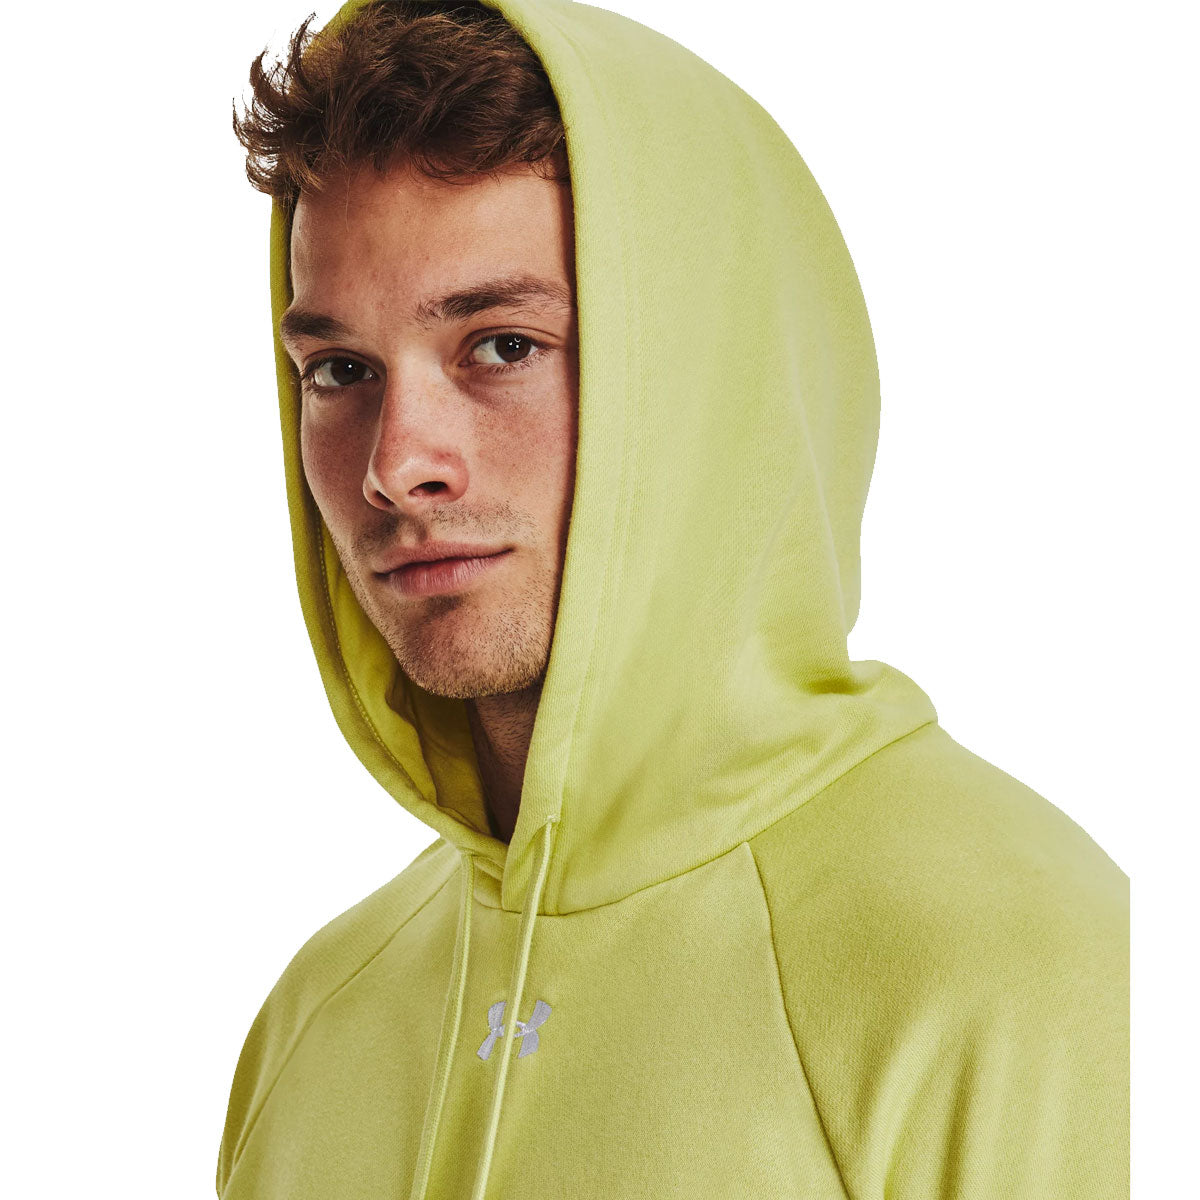 Under Armour Rival Fleece Hoodie - Mens - Lime Yellow/White